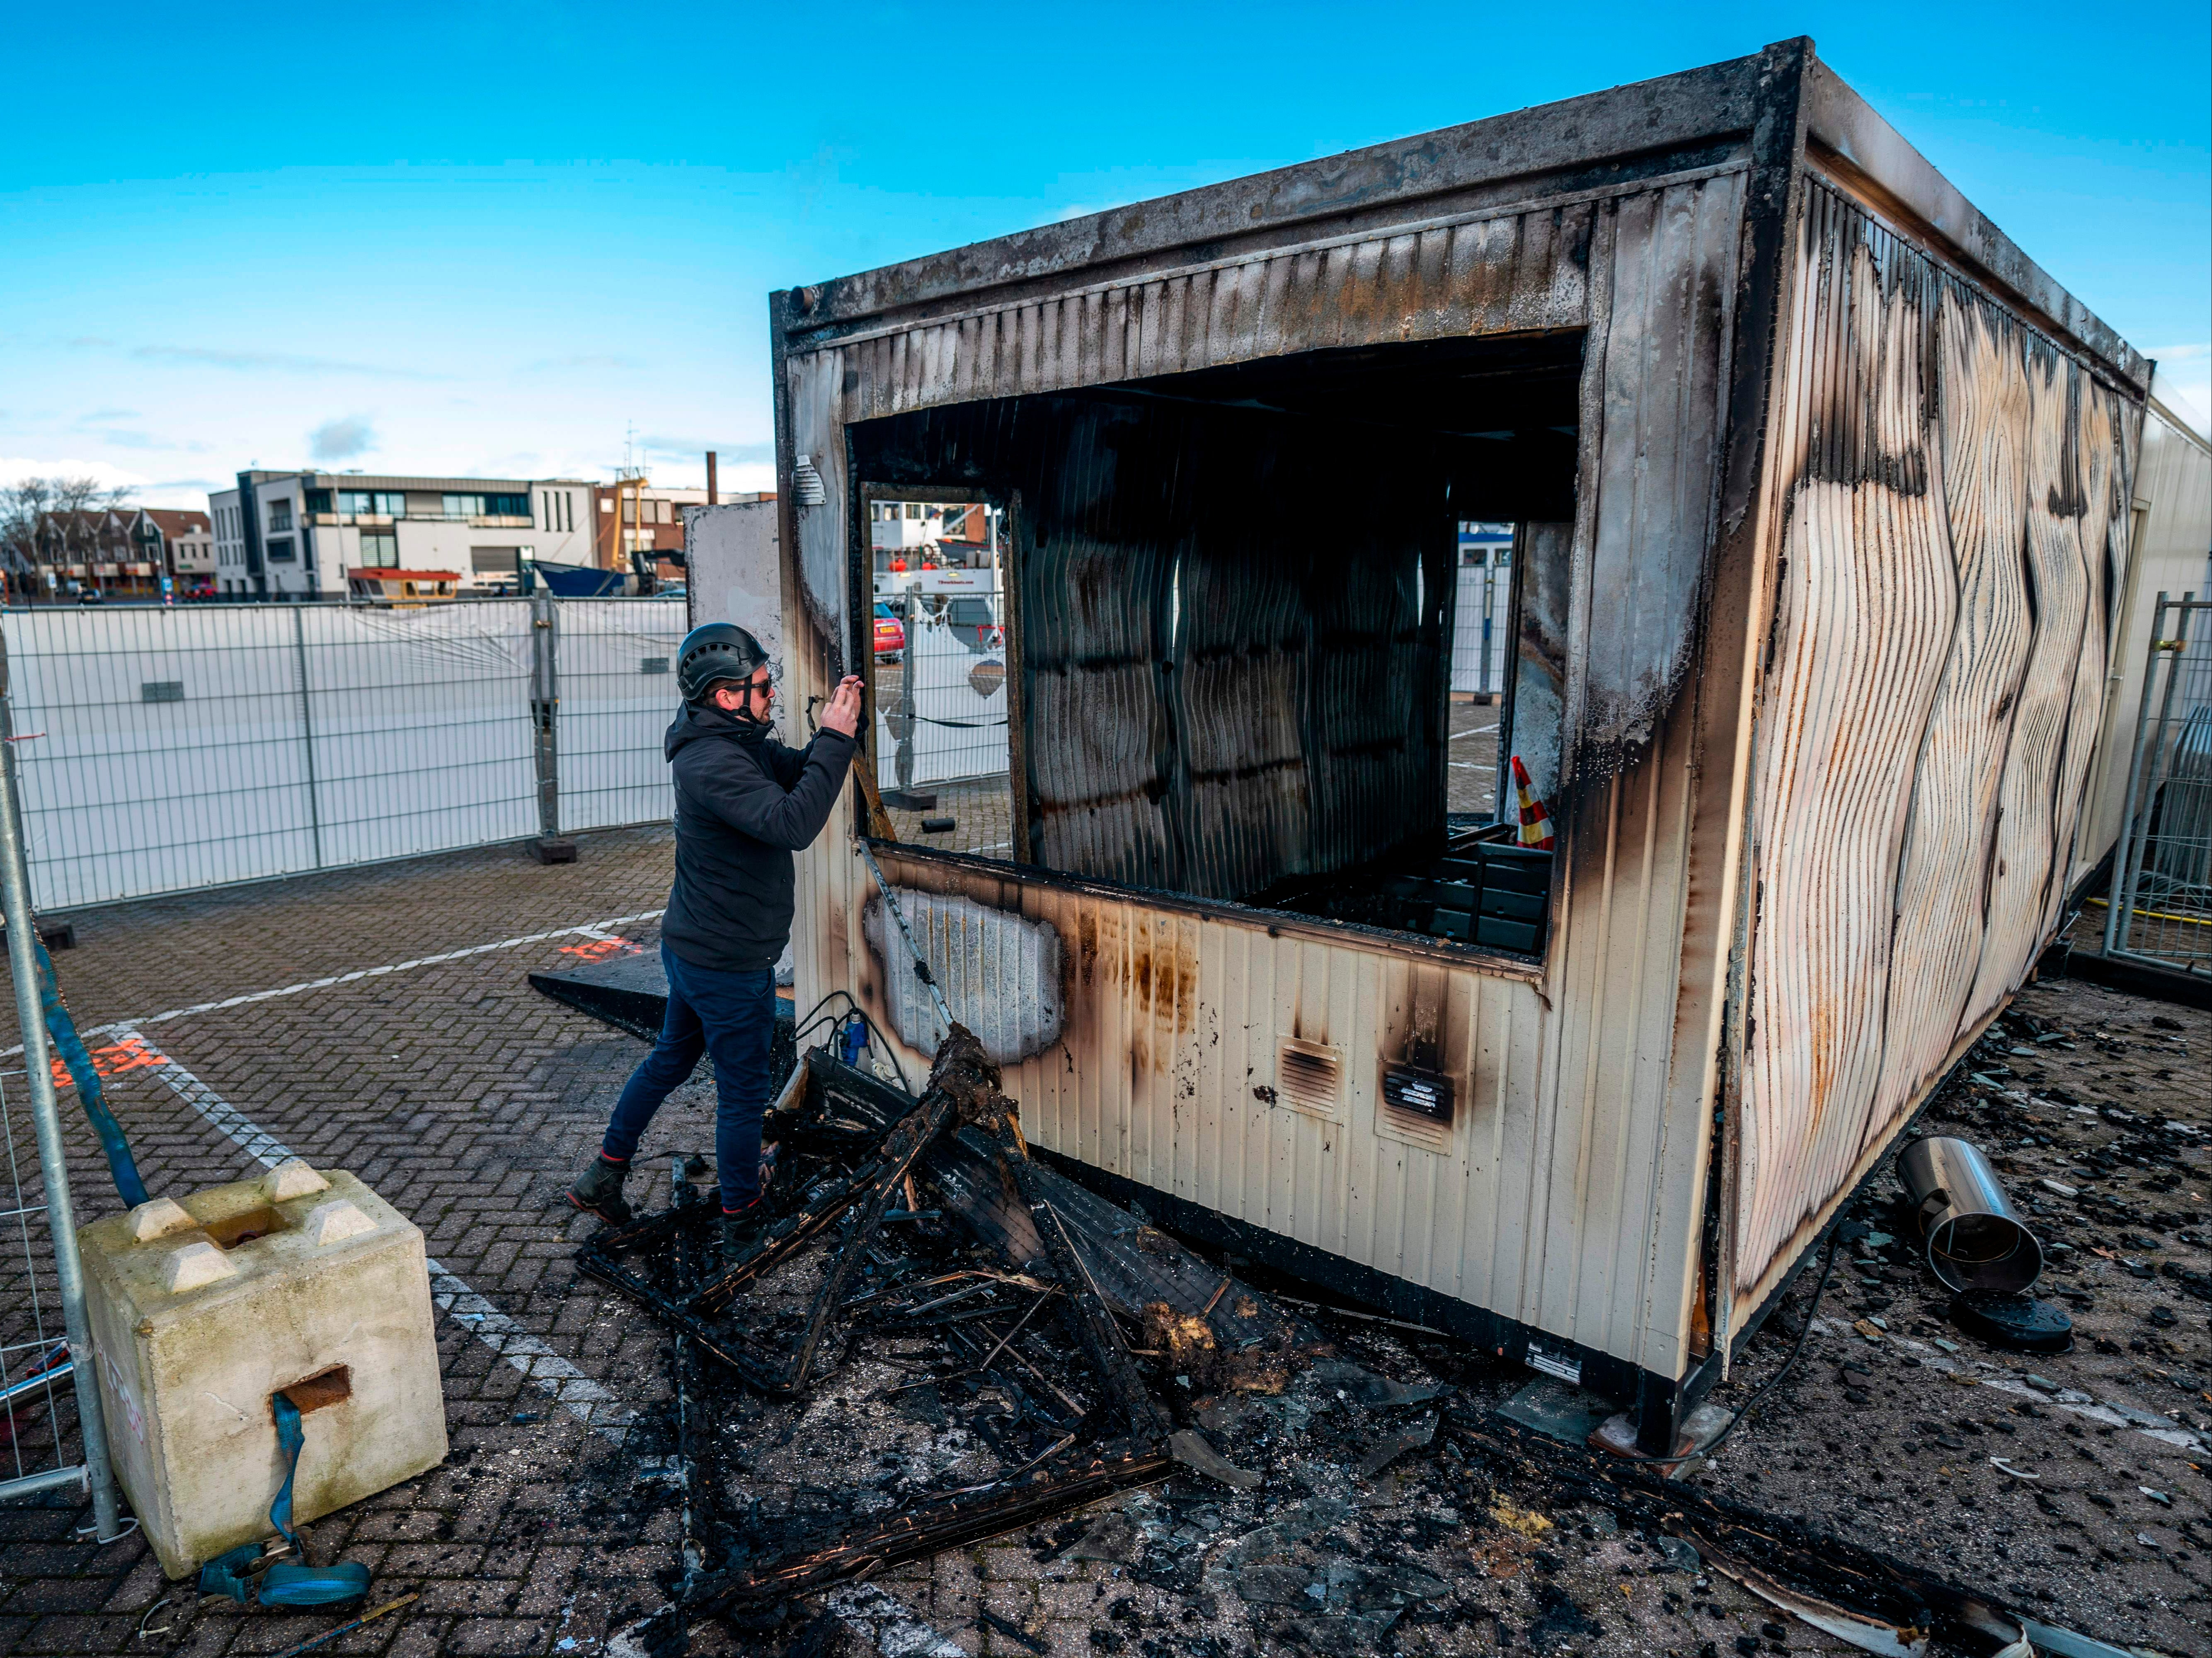 Riot police were called in as young rioters torched a coronavirus test centre in Urk